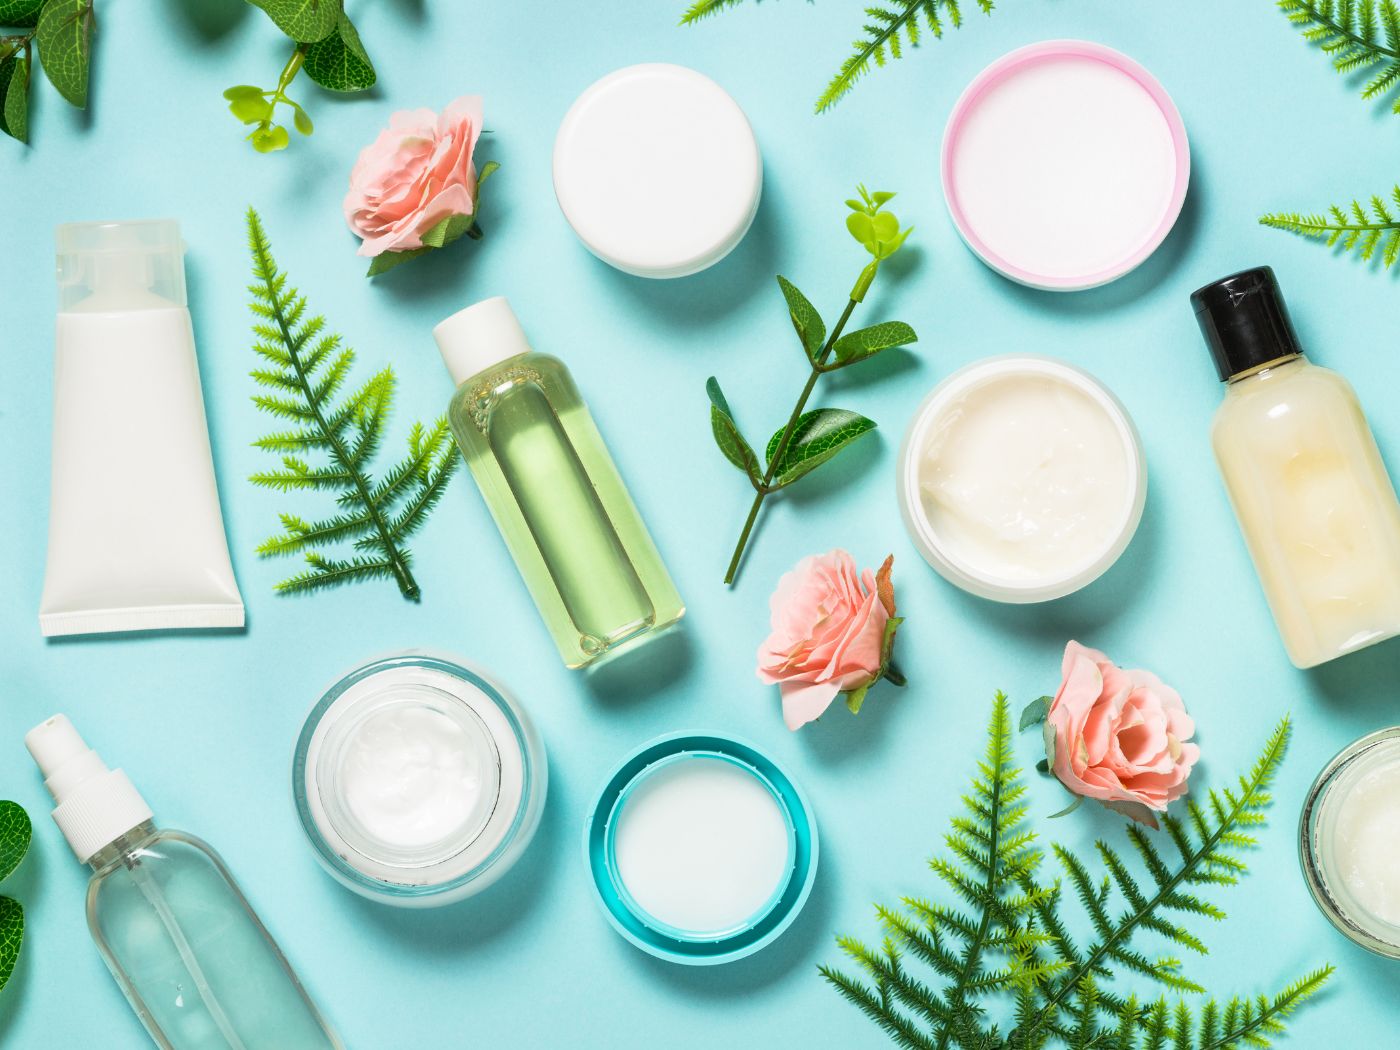 Natural Skincare Benefits - 3 Reasons Why Chemical-Free Products Are Good